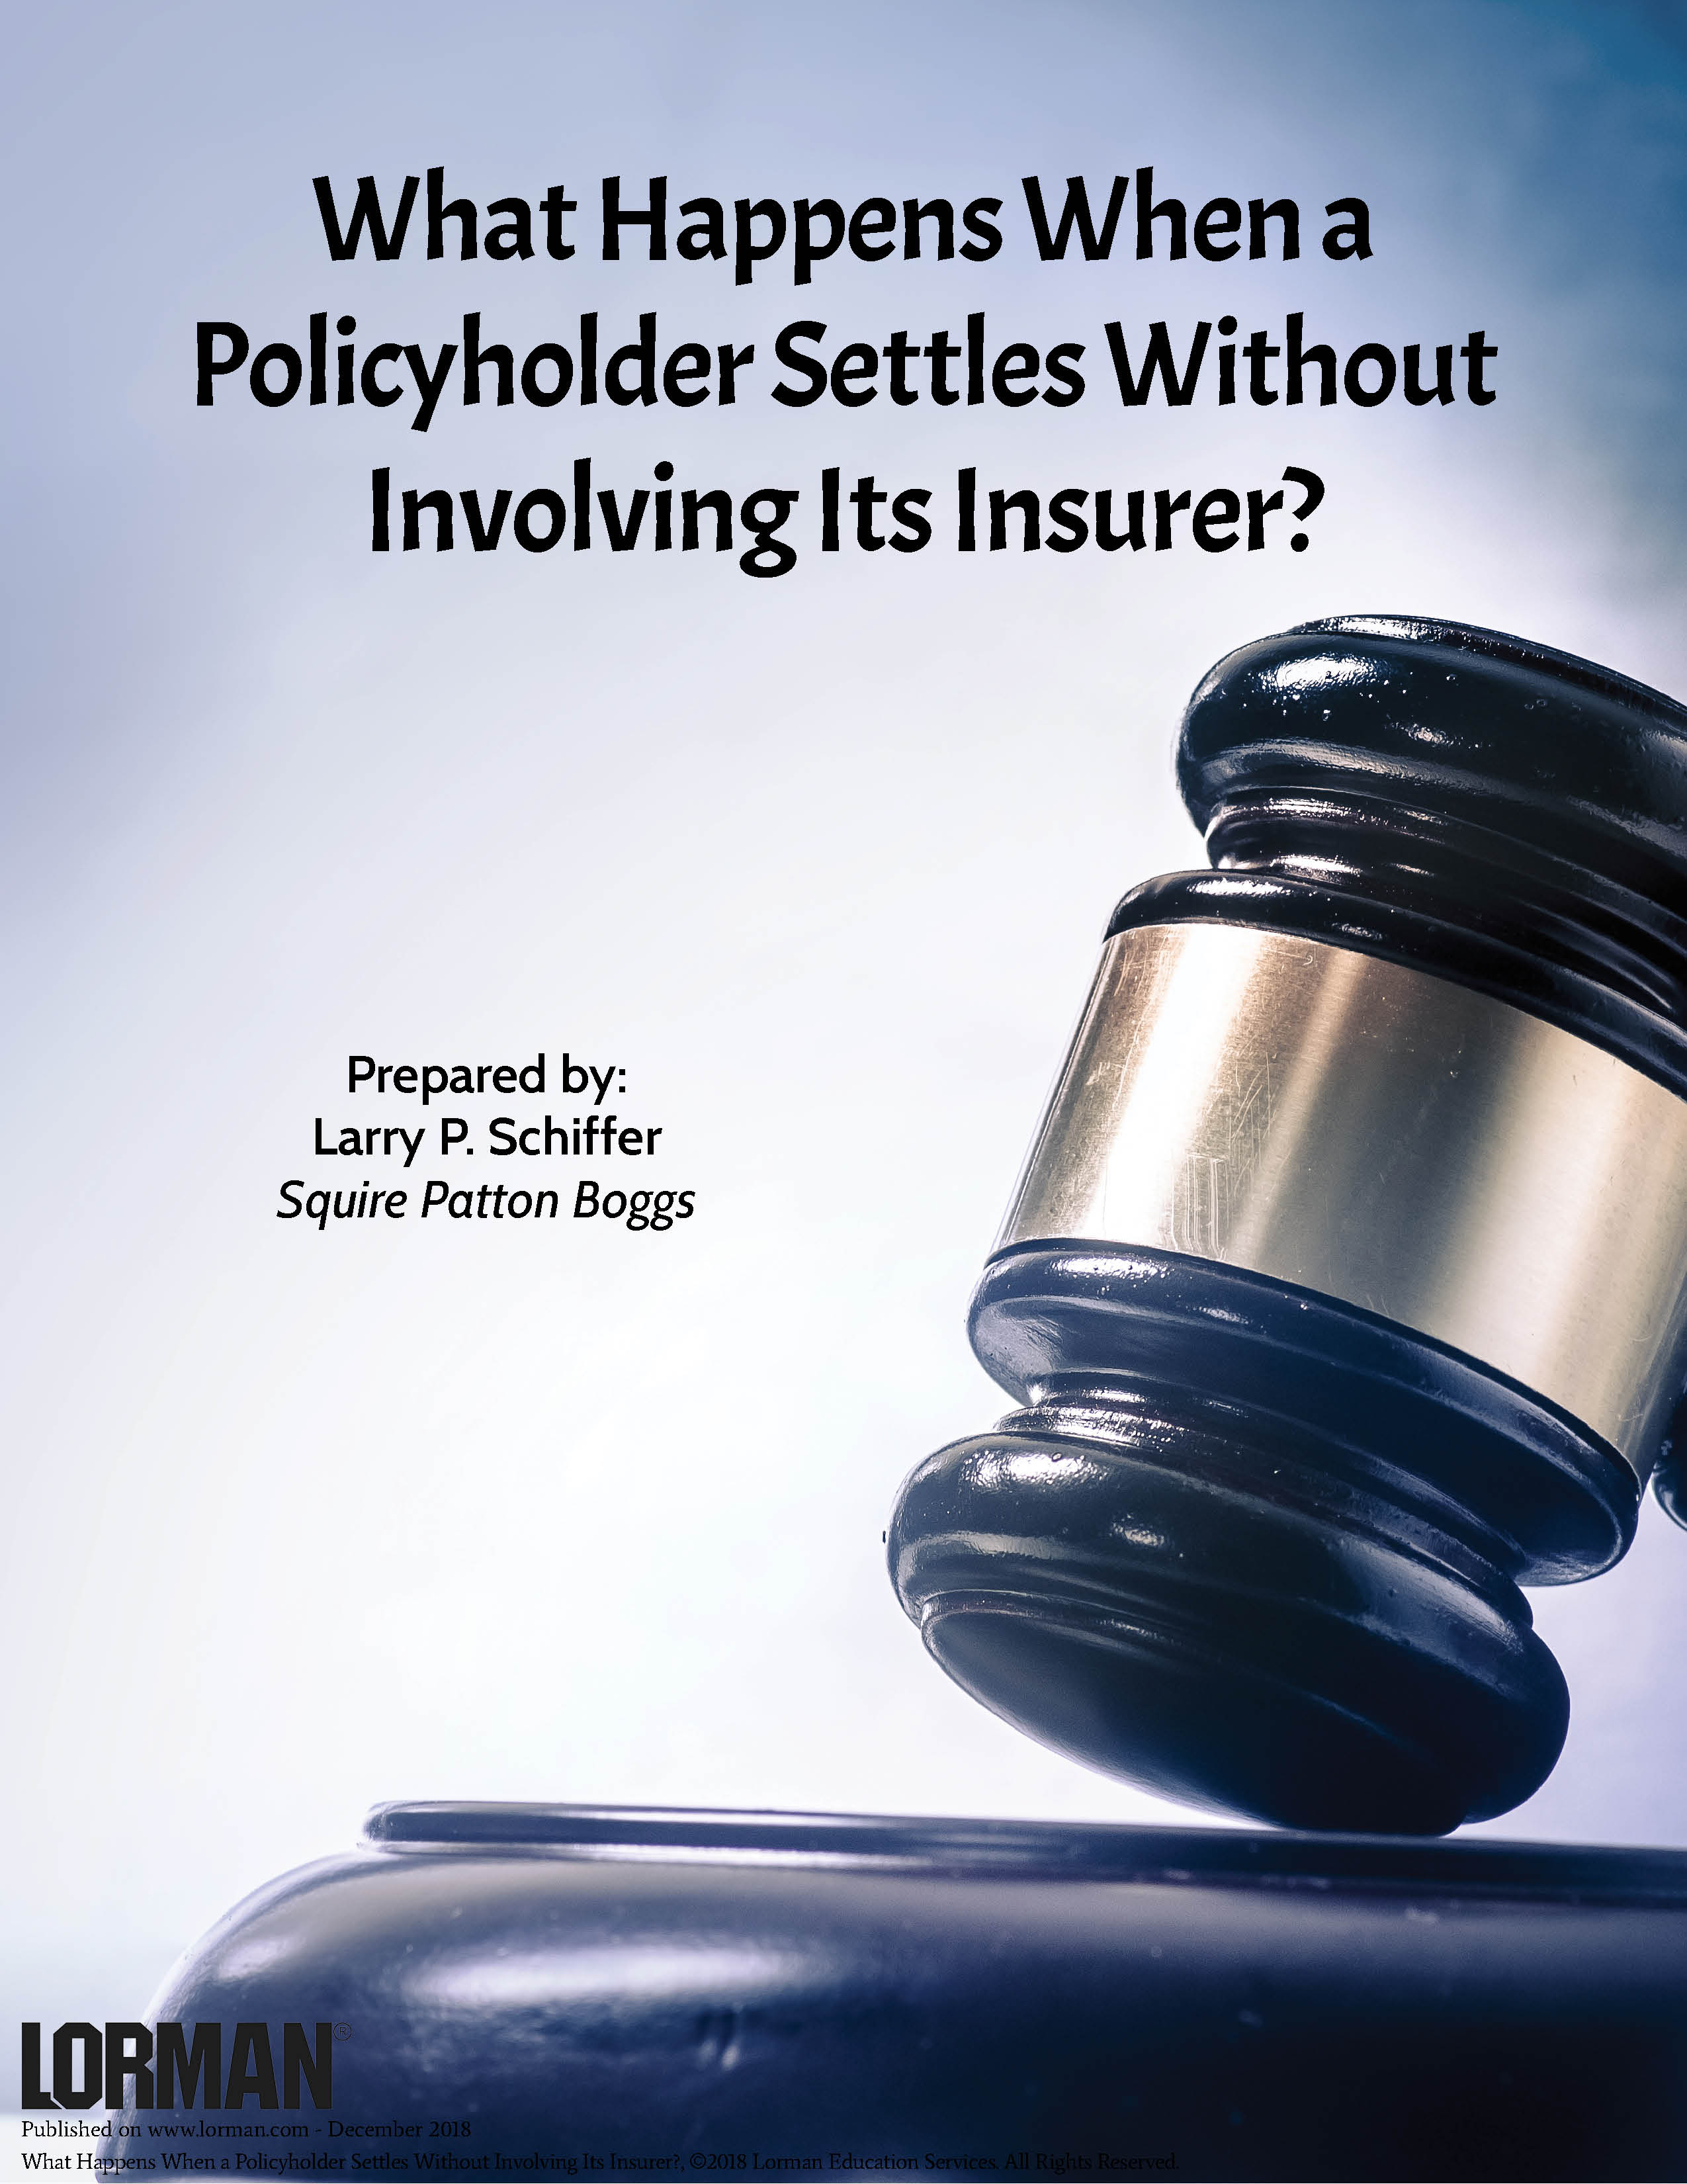 What Happens When a Policyholder Settles Without Involving Its Insurer?